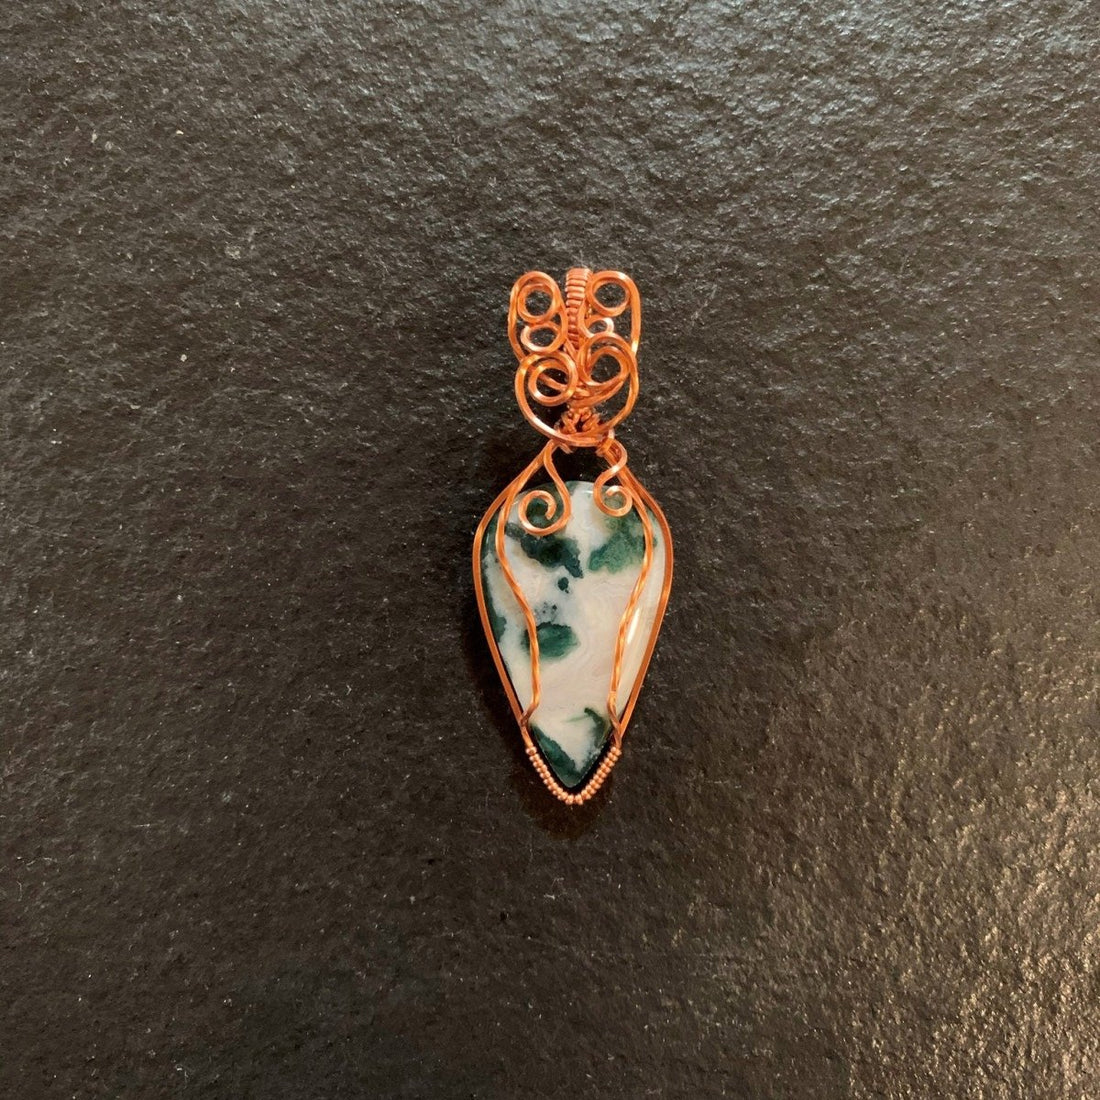 Pendant made of Moss Agate Teardrop with copper wire wrap; 7/8" w x 2.25" long inc bail